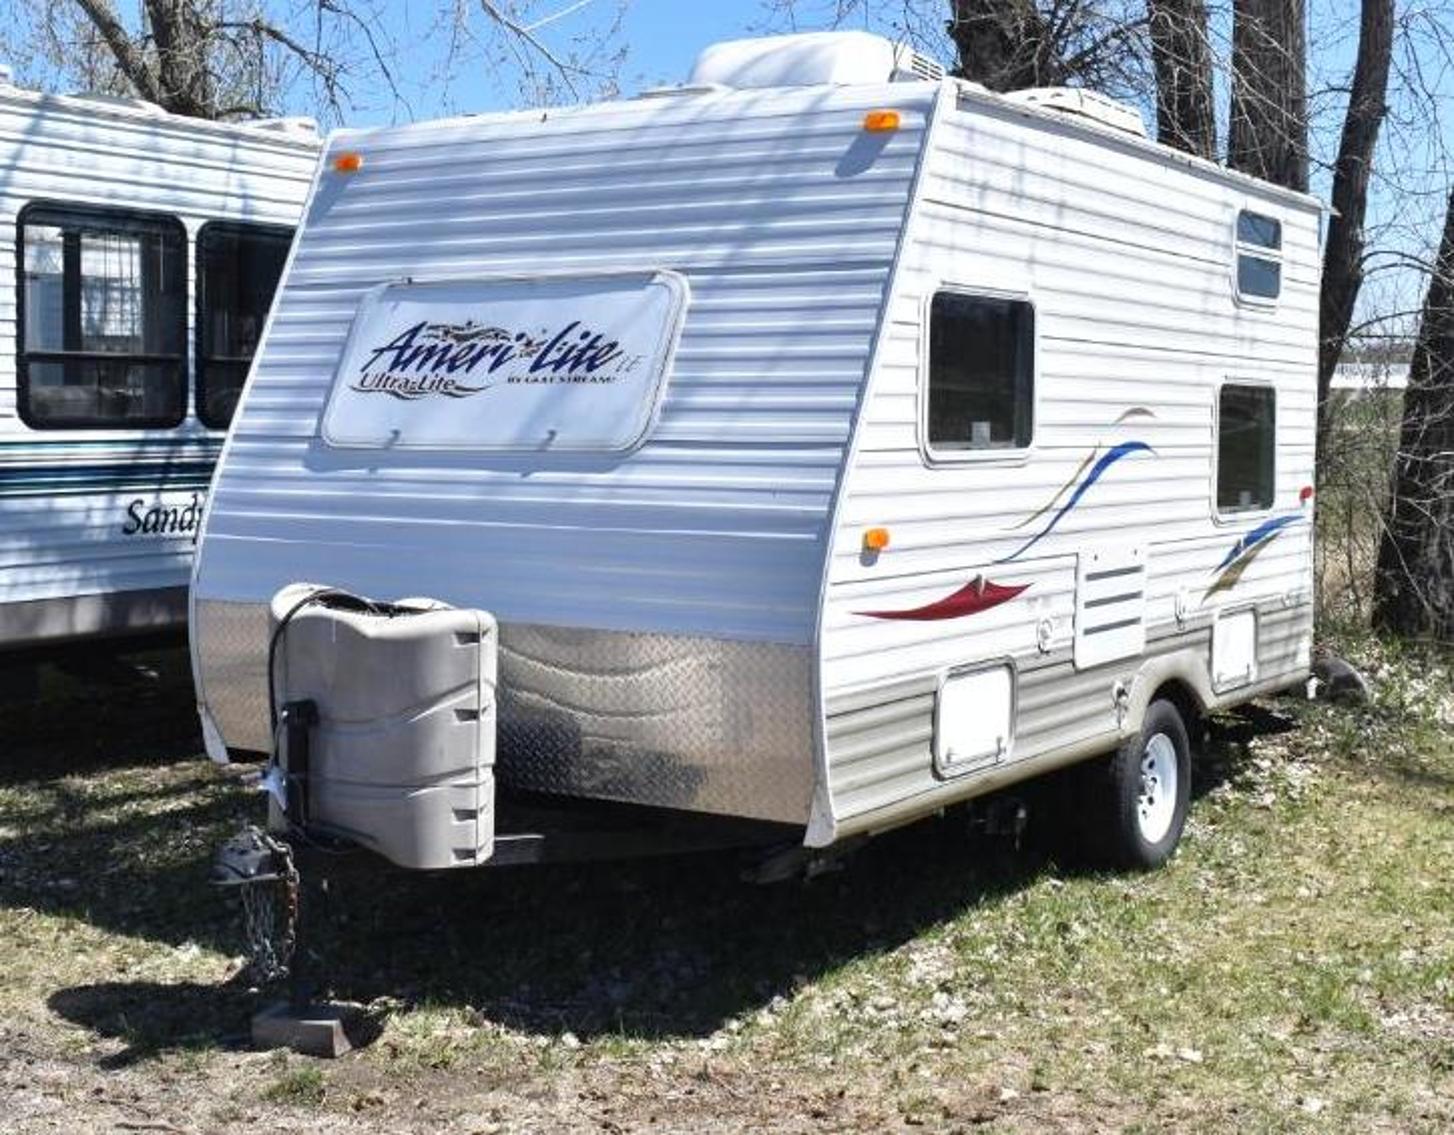 37 Units: (22) Travel Trailers, (11) 5th Wheels, (1) Motorhome and (3) Vehicles